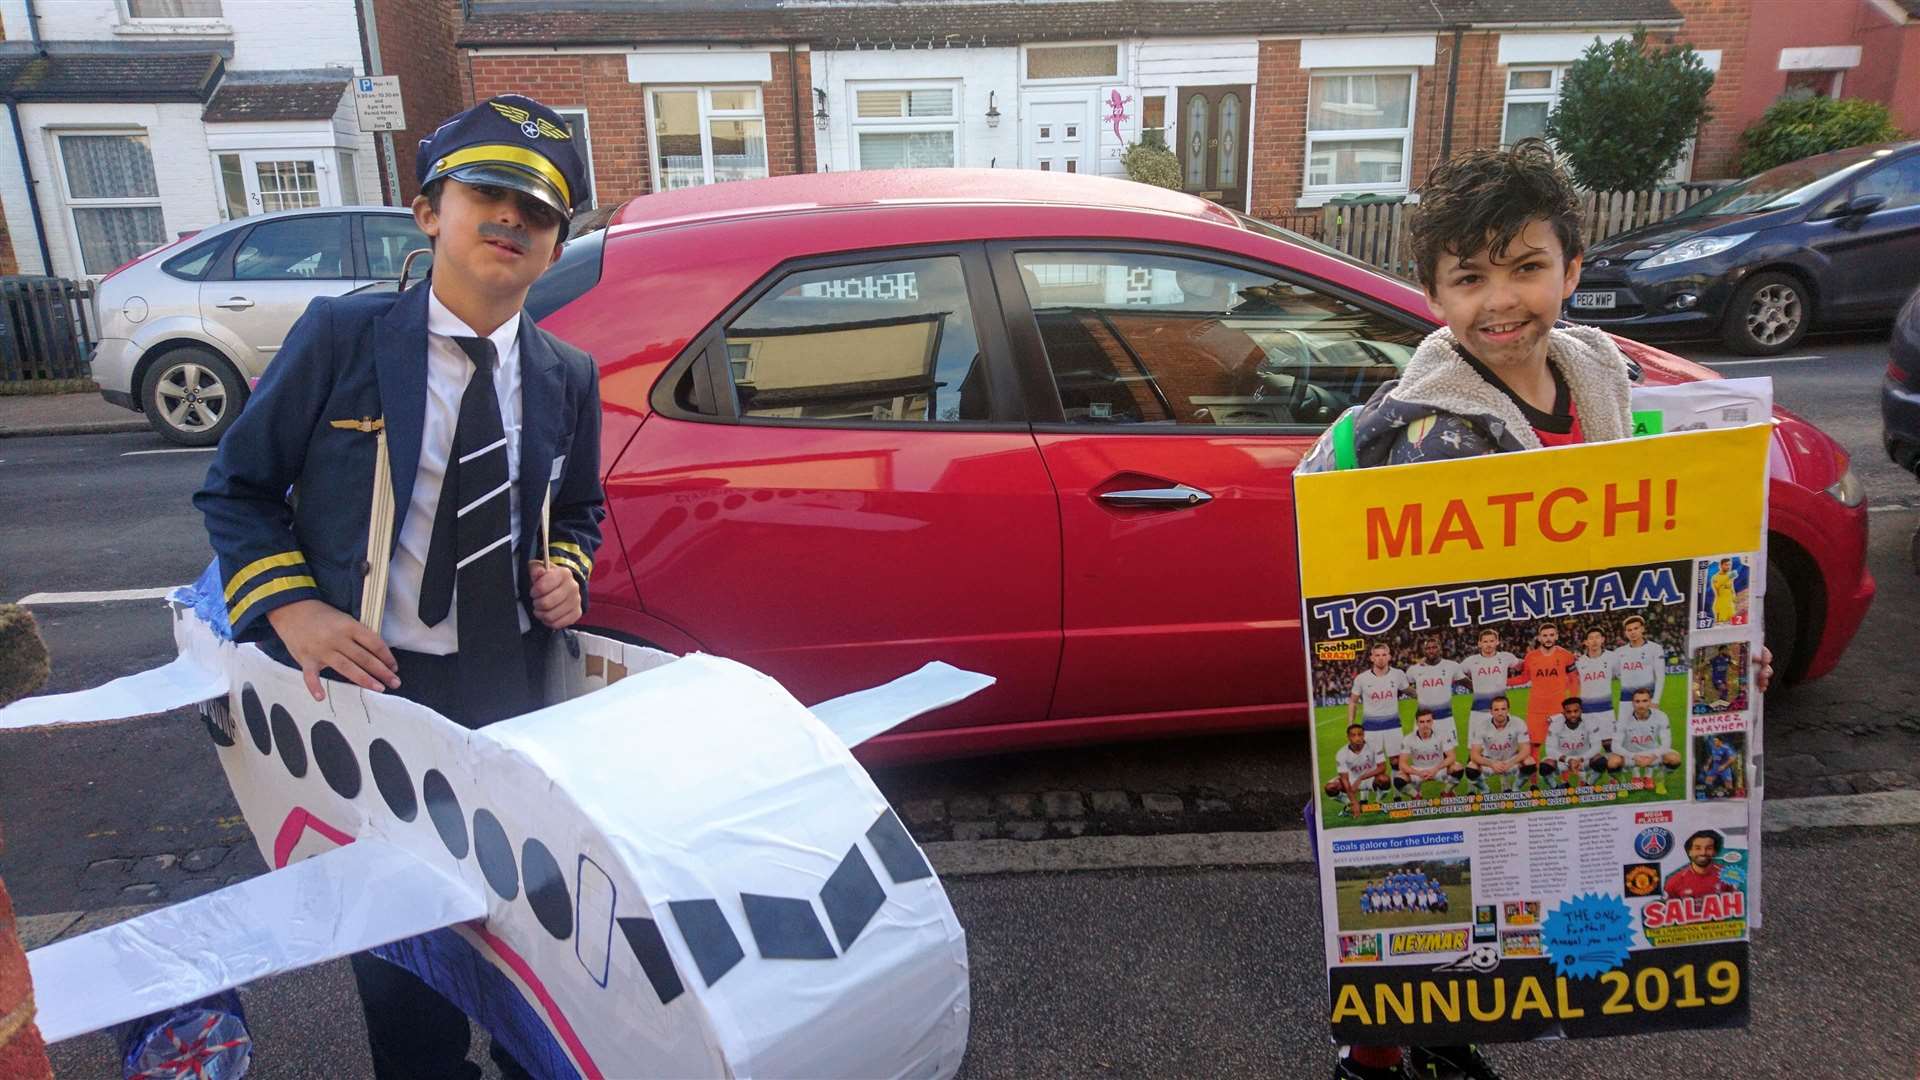 Sussex Road Primary School pupils Danny Raveney, aged 10, as Captain Sully who landed his plane on the Hudson River and brother Jojo, age eight, who went as the Match Annual.